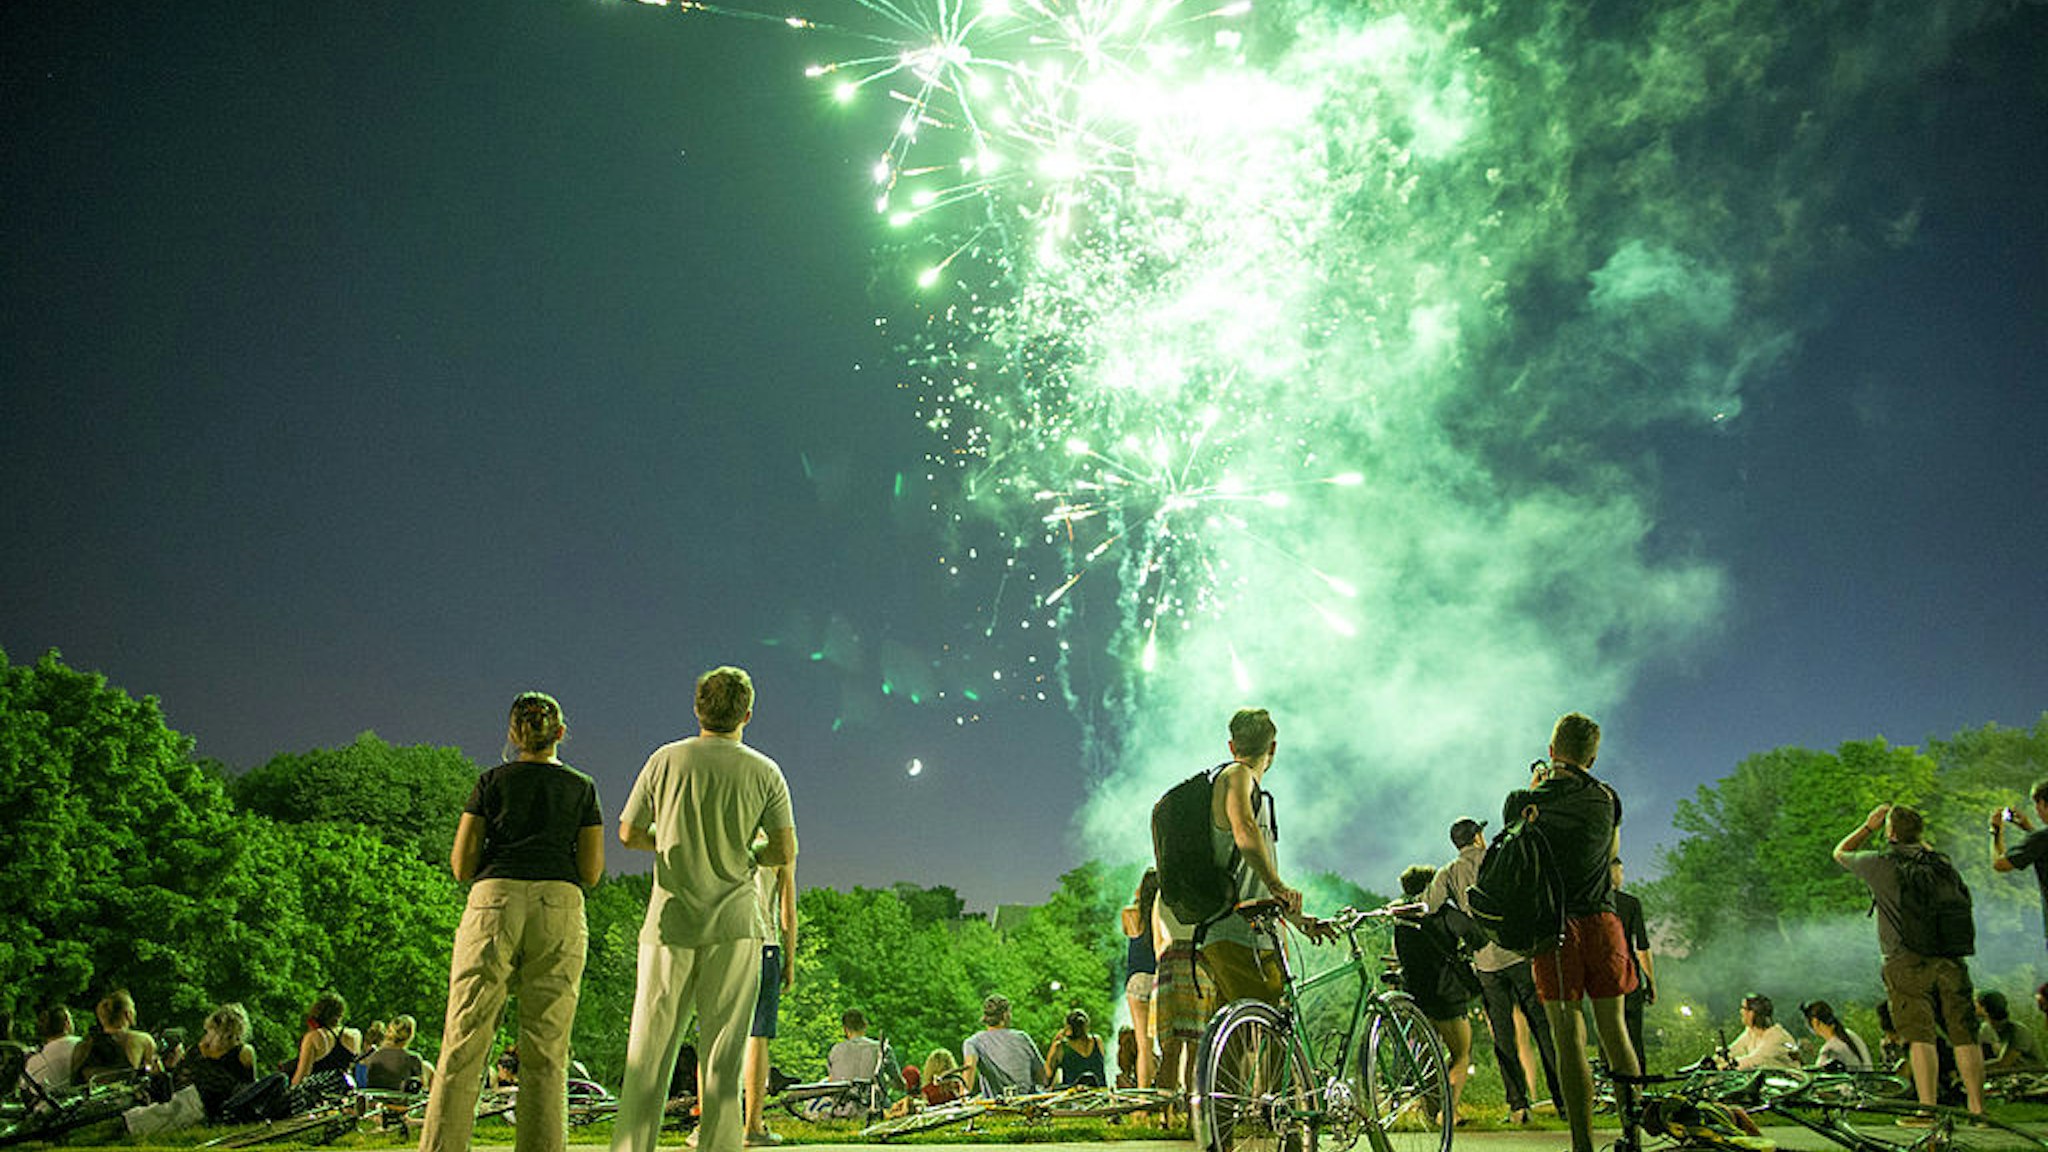 People set off fireworks at Trinity Bellwoods Park on Canada Day.